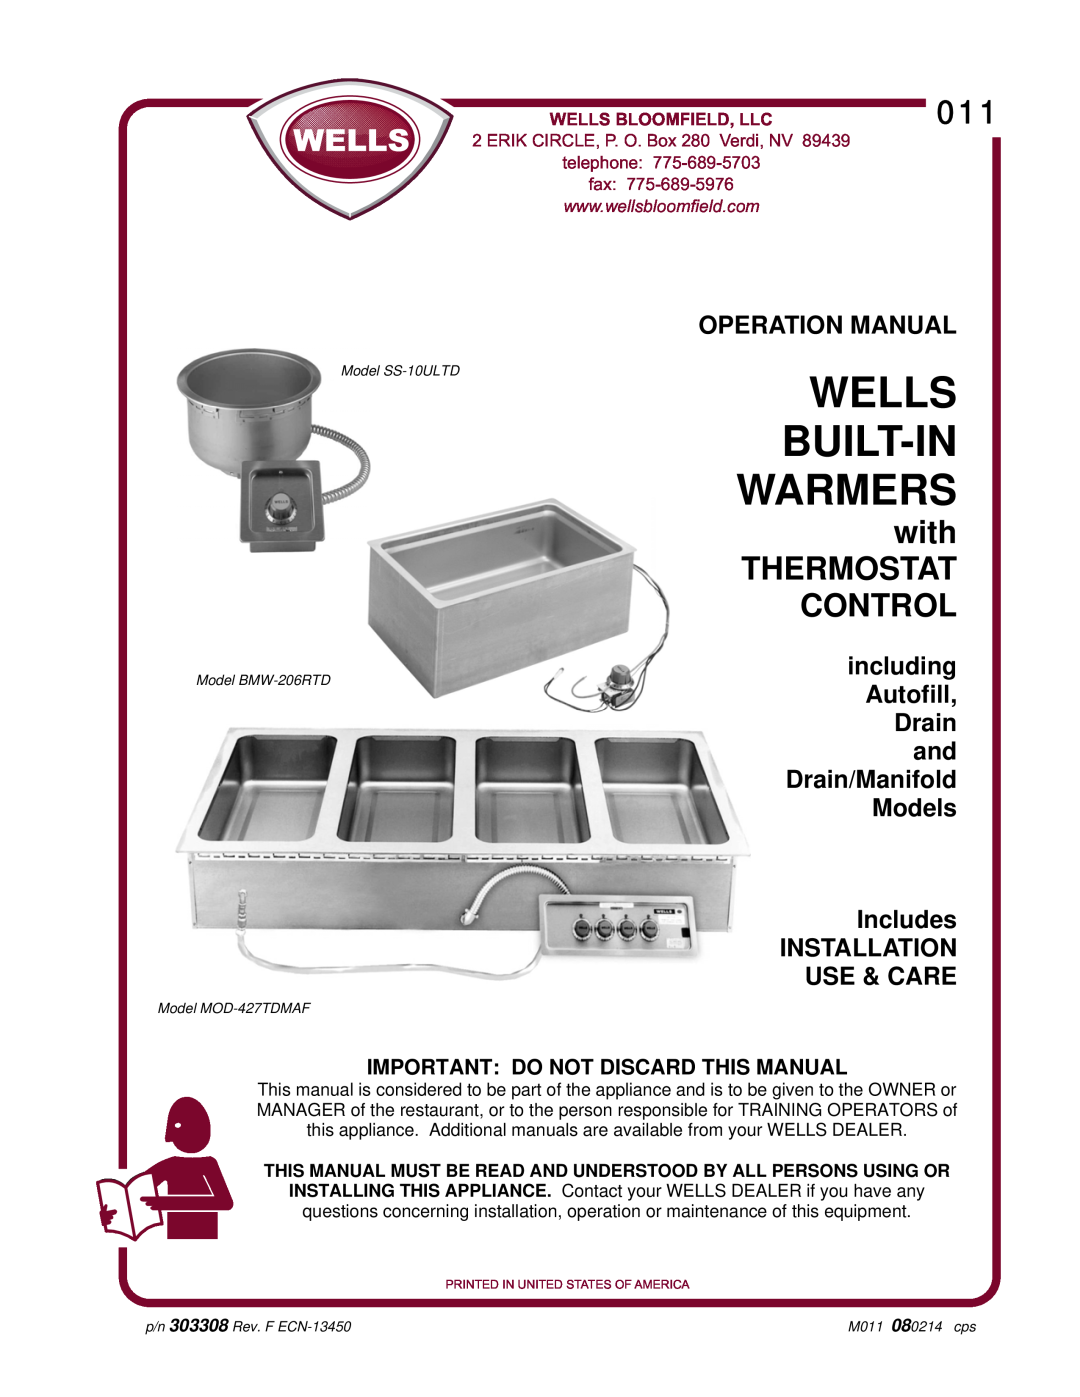 Wells MOD-427TDMAF operation manual with THERMOSTAT CONTROL, Important Do Not Discard This Manual, Wells Built-Inwarmers 